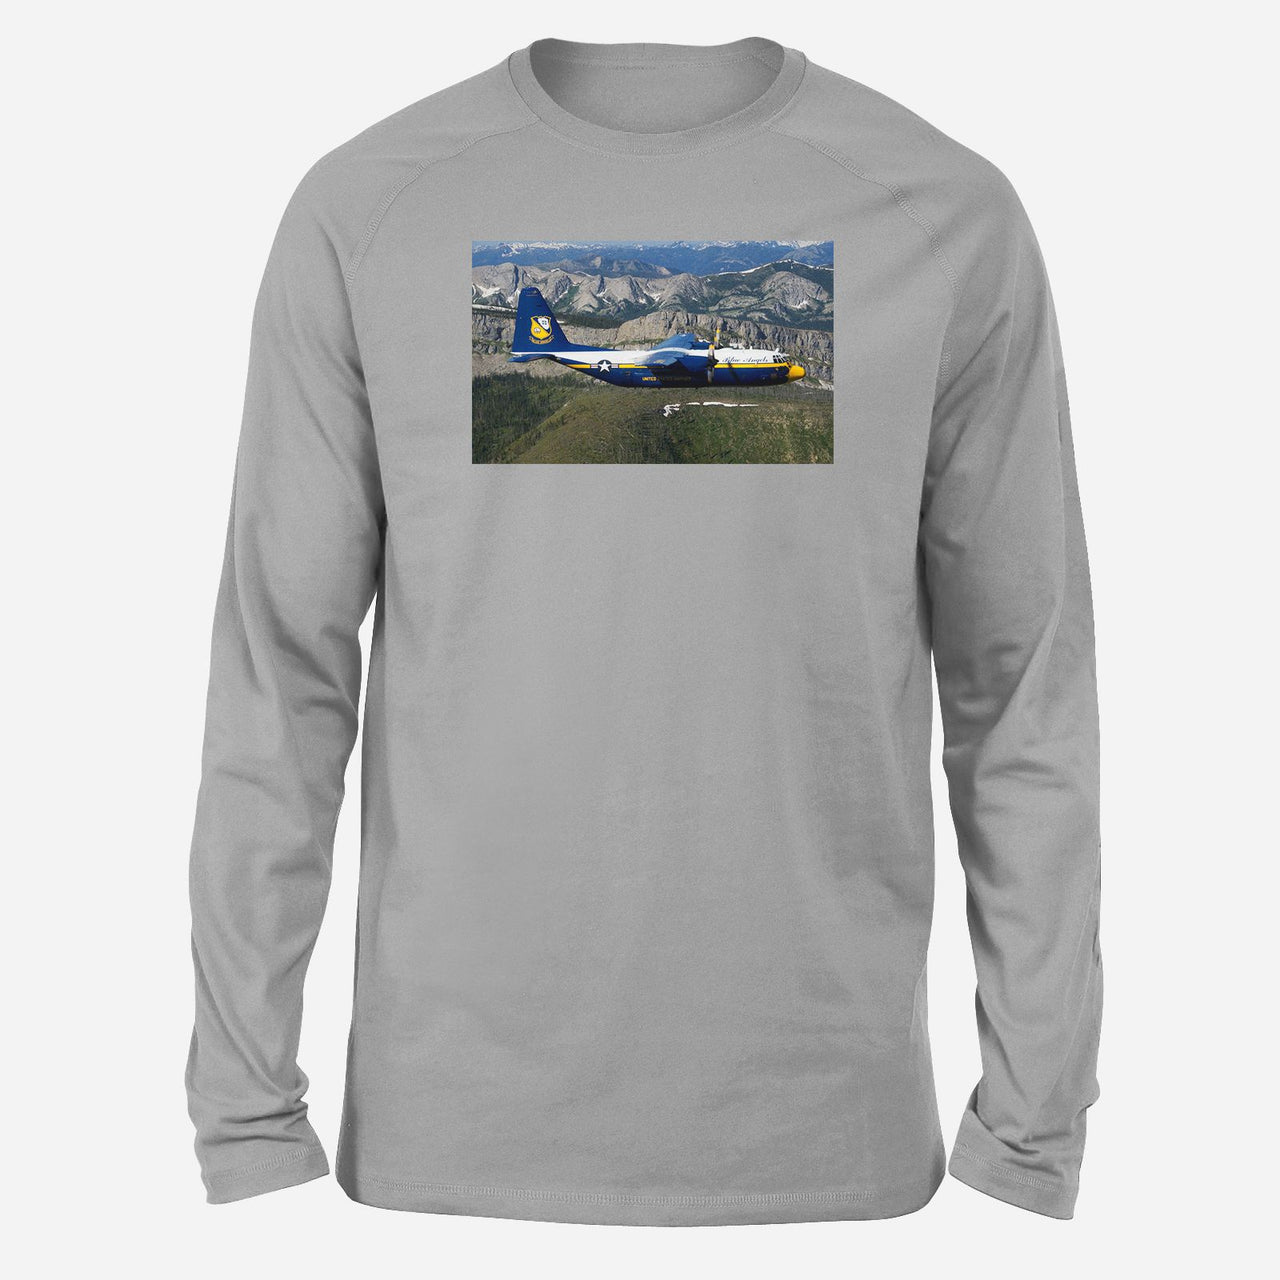 Amazing View with Blue Angels Aircraft Designed Long-Sleeve T-Shirts